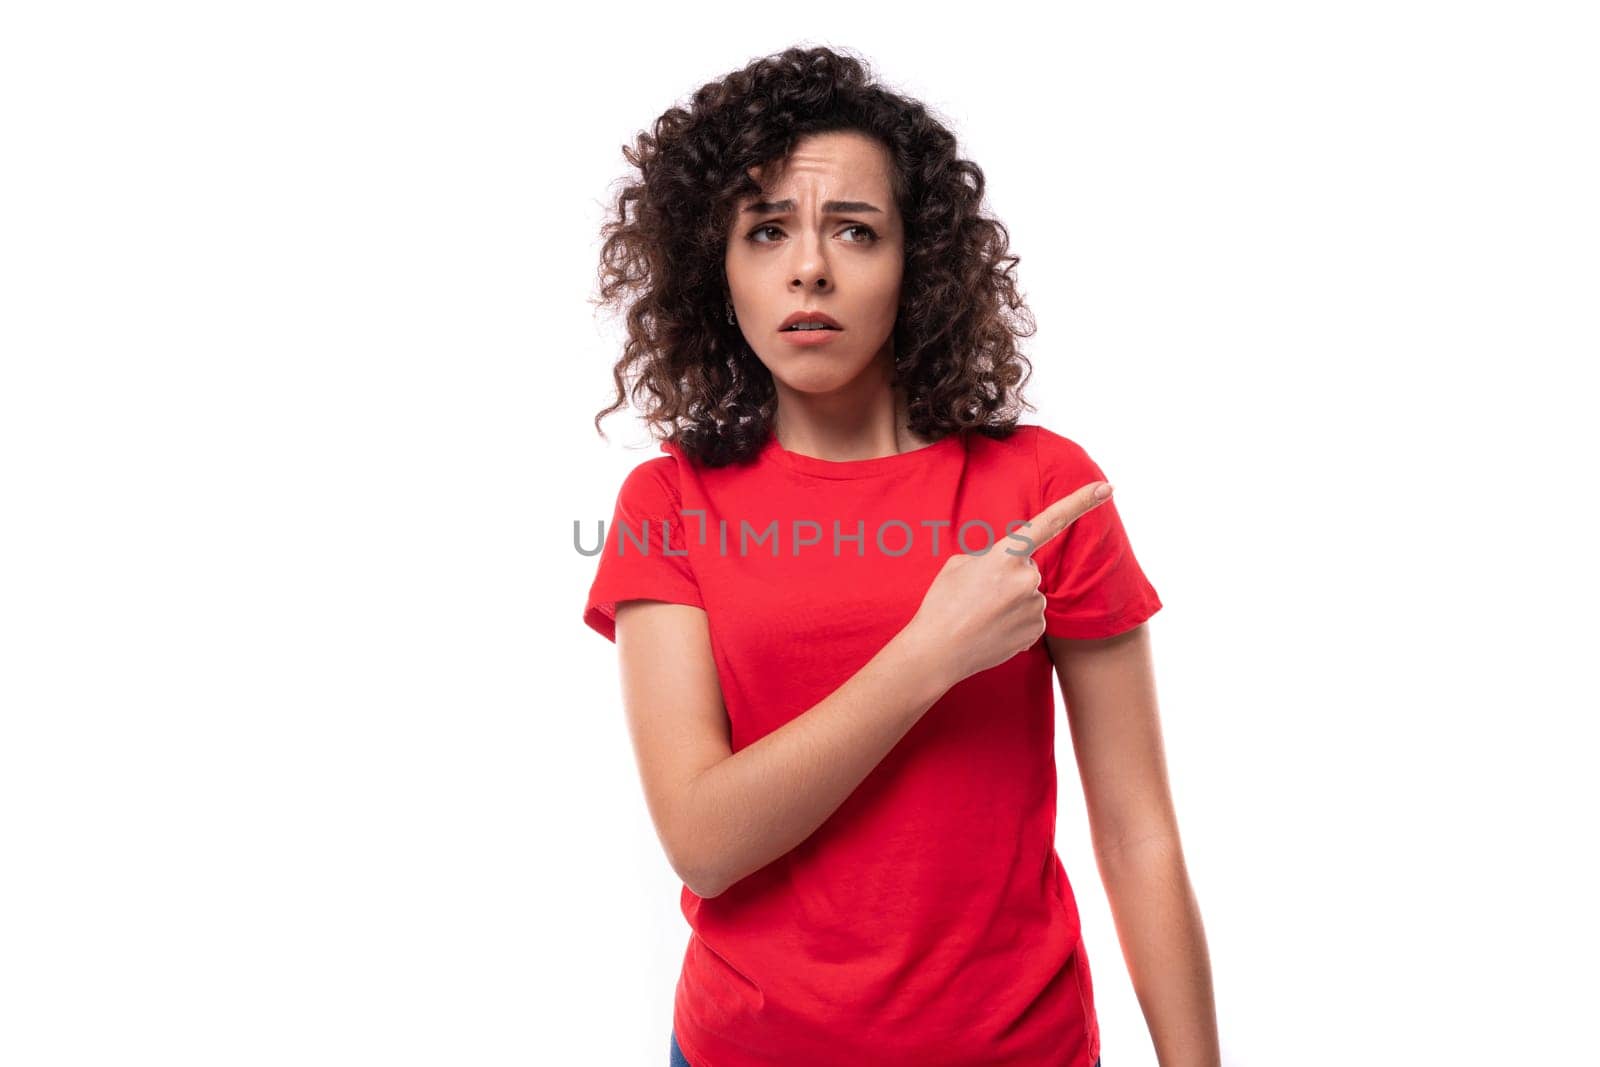 portrait of a 30 year old woman dressed in a red basic t-shirt on a white background with copy space.